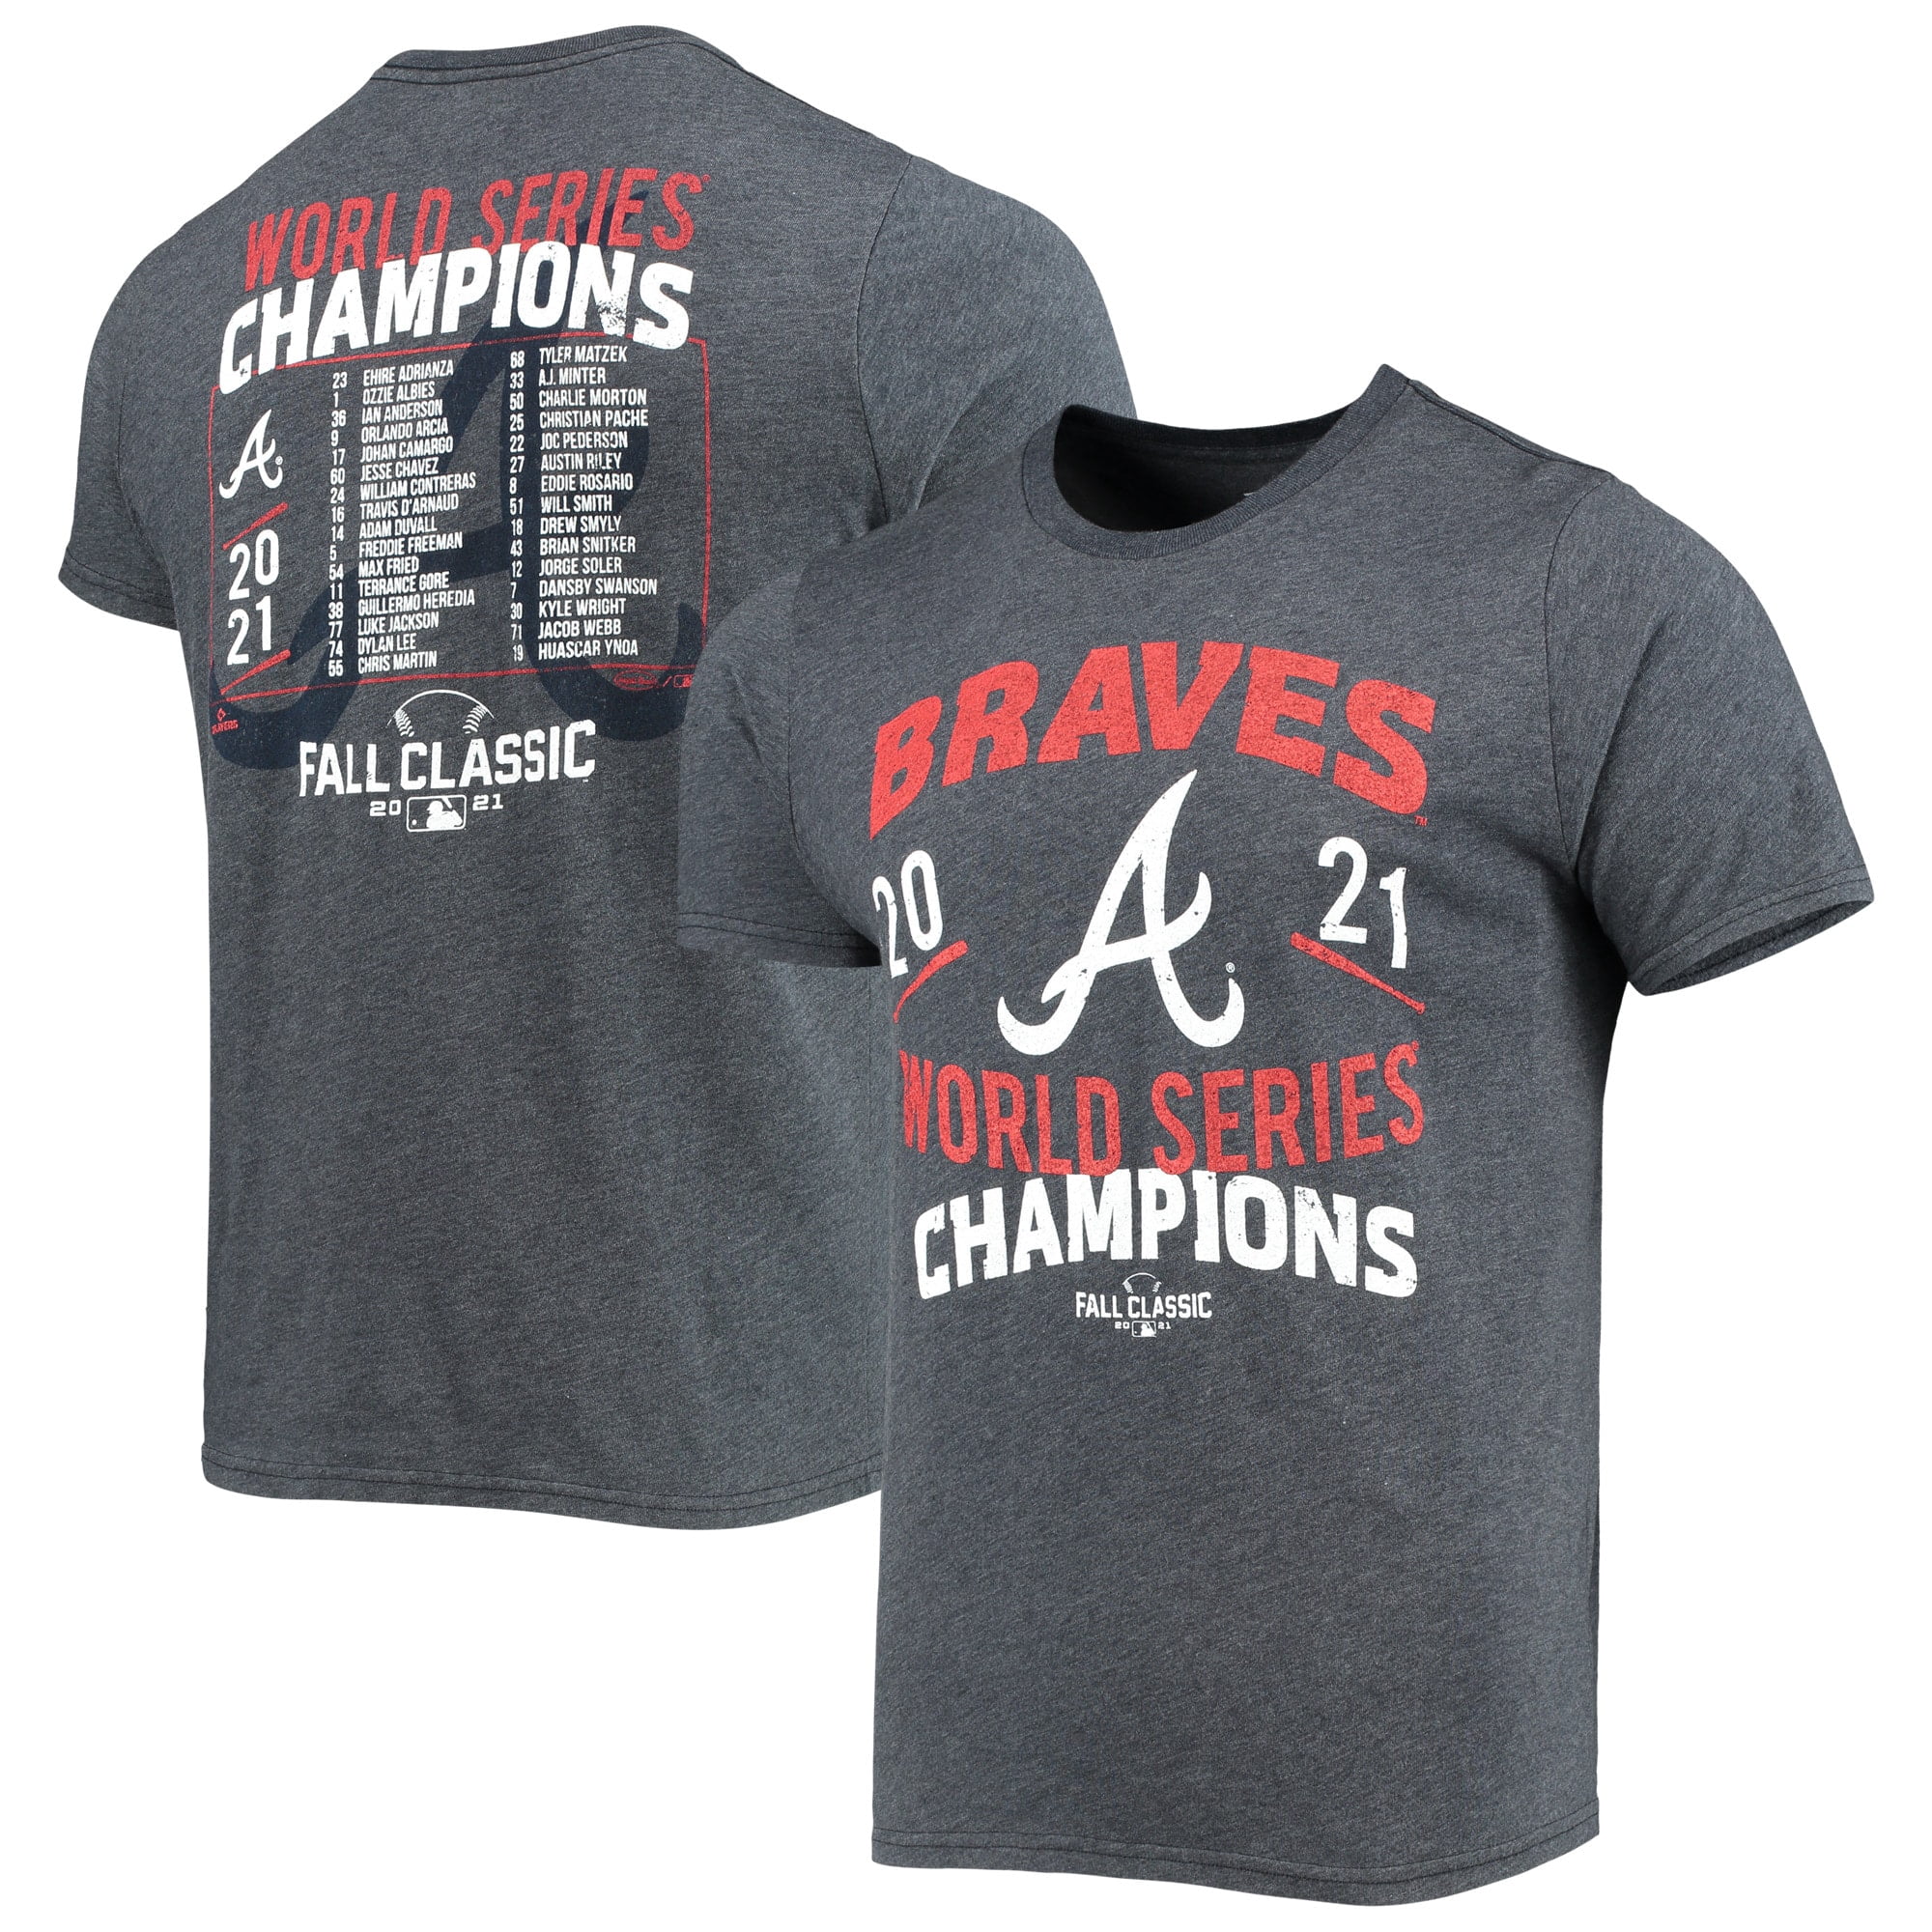 Buy Braves World Series Champs Gear